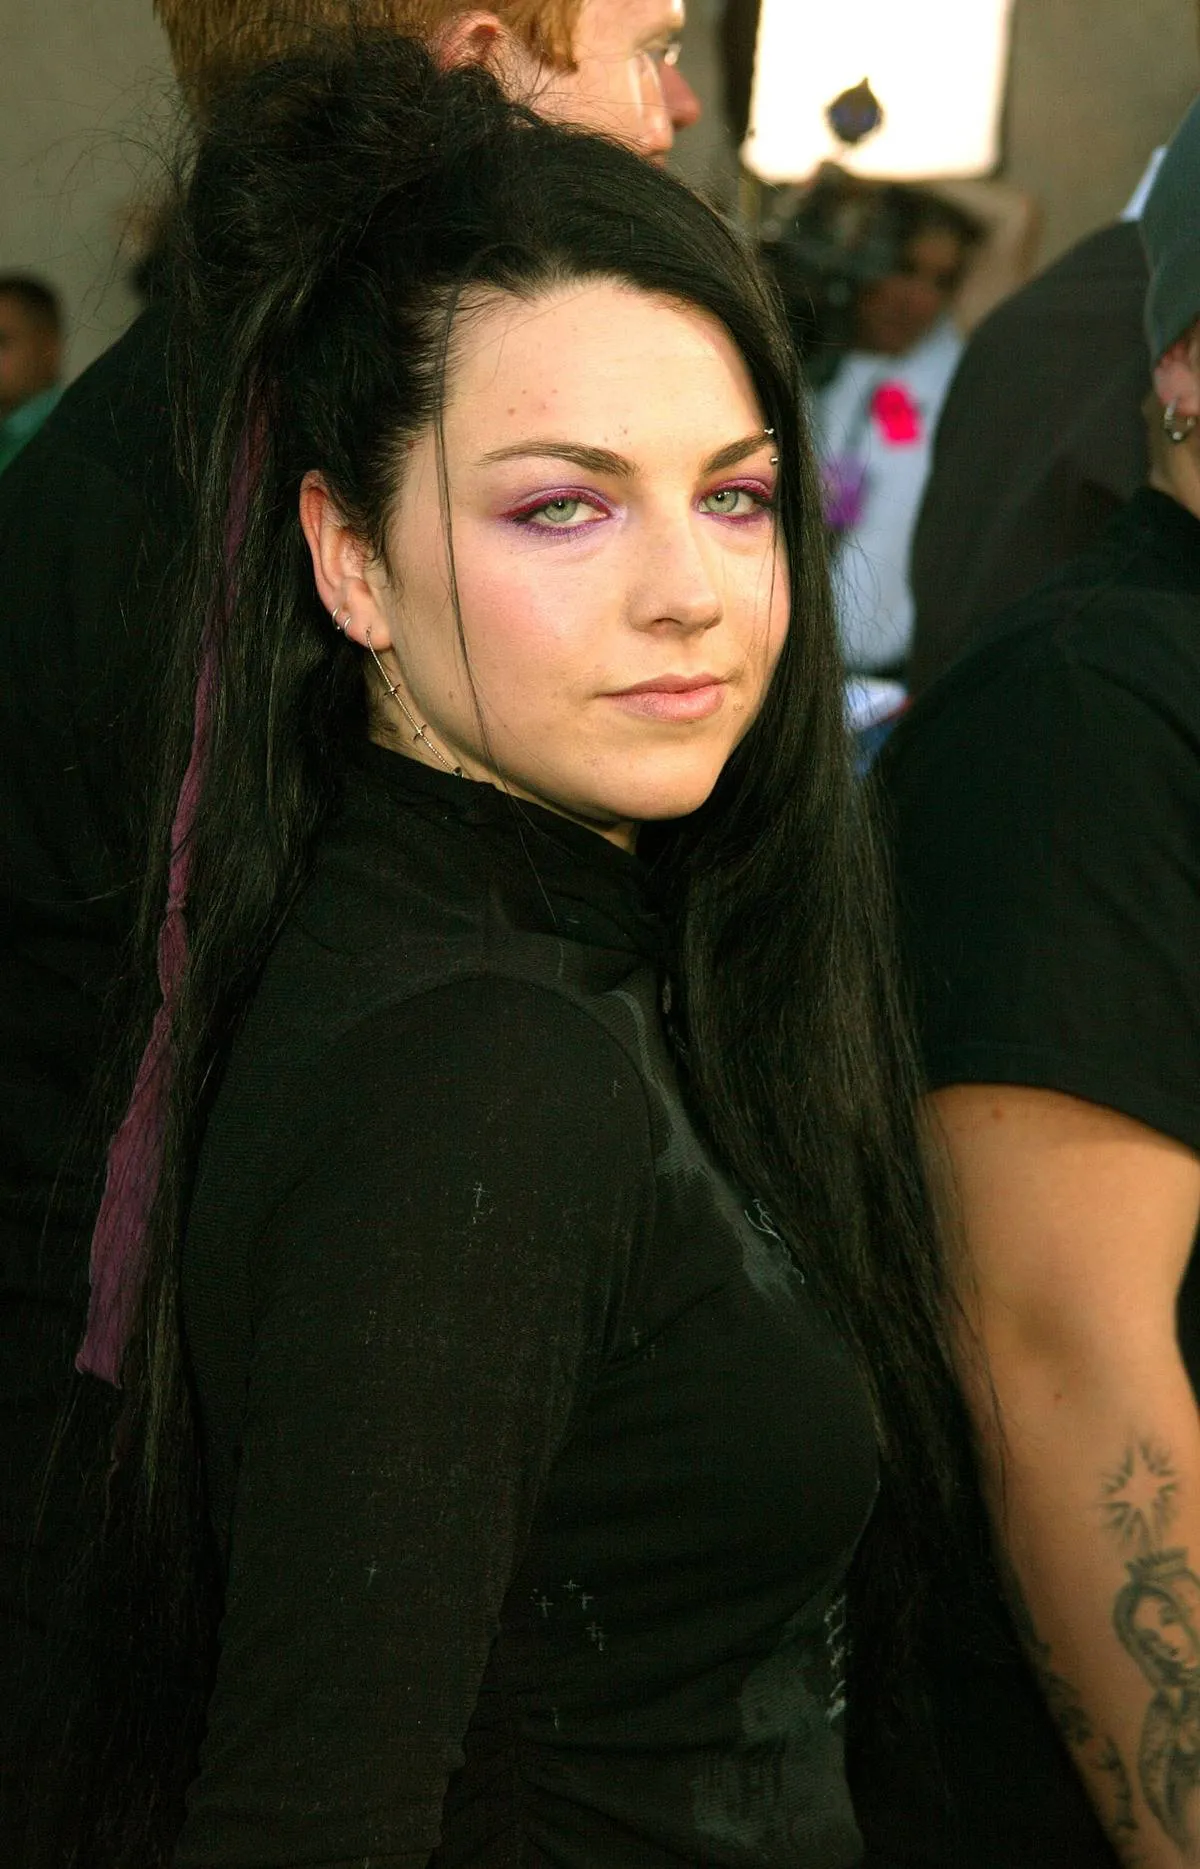 Amy Lee of Evanescence during 2003 Teen Choice Awards - Arrivals at Universal Amphitheatre in Universal City, California, United States.